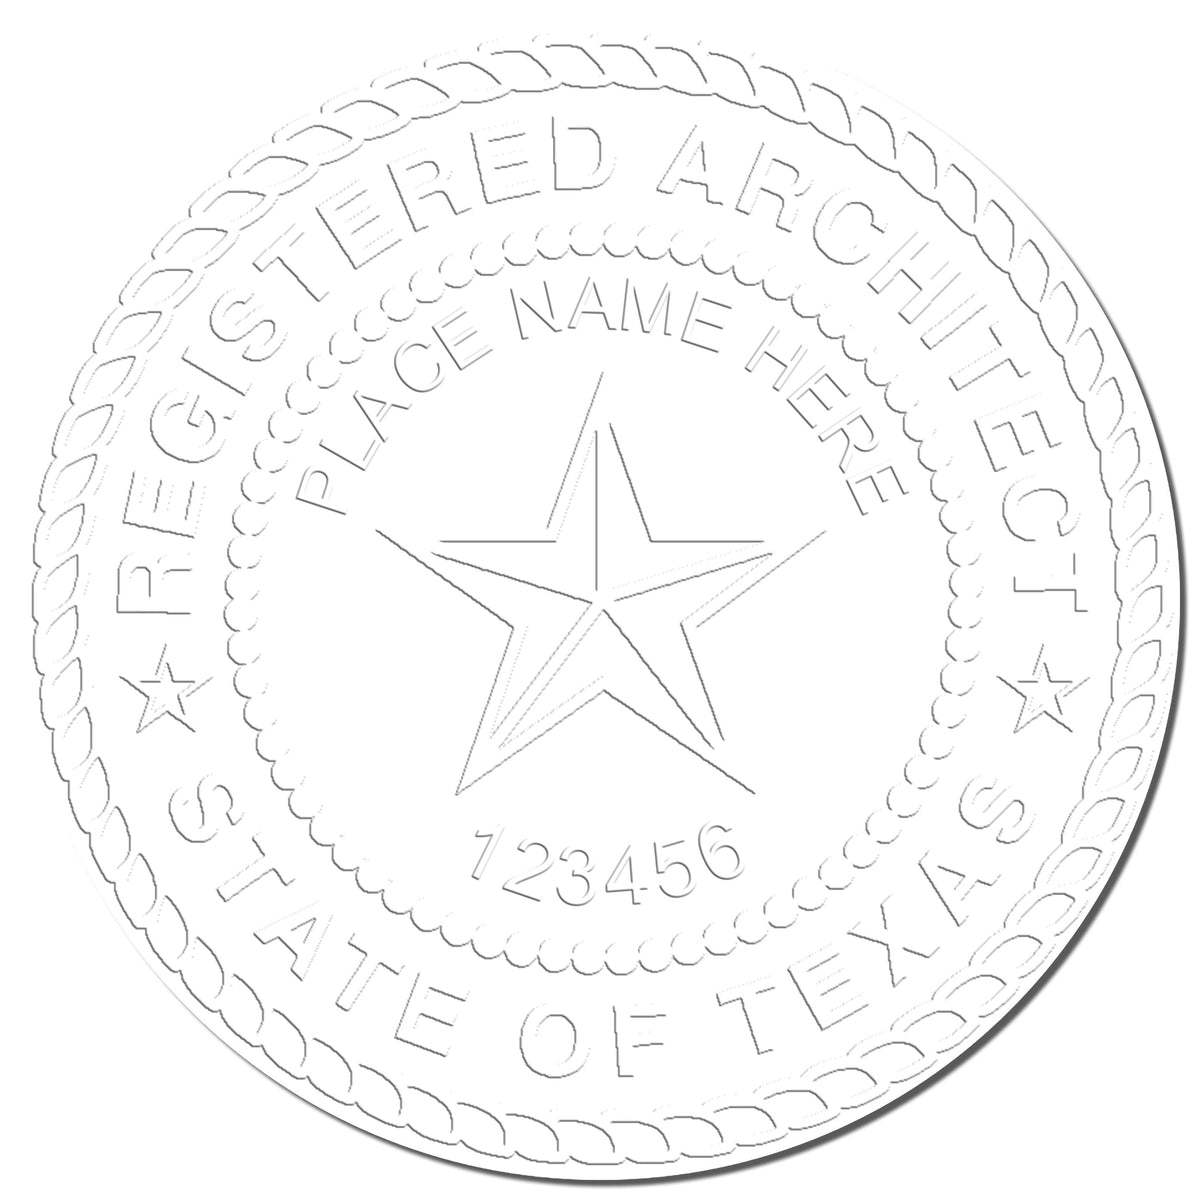 This paper is stamped with a sample imprint of the Gift Texas Architect Seal, signifying its quality and reliability.